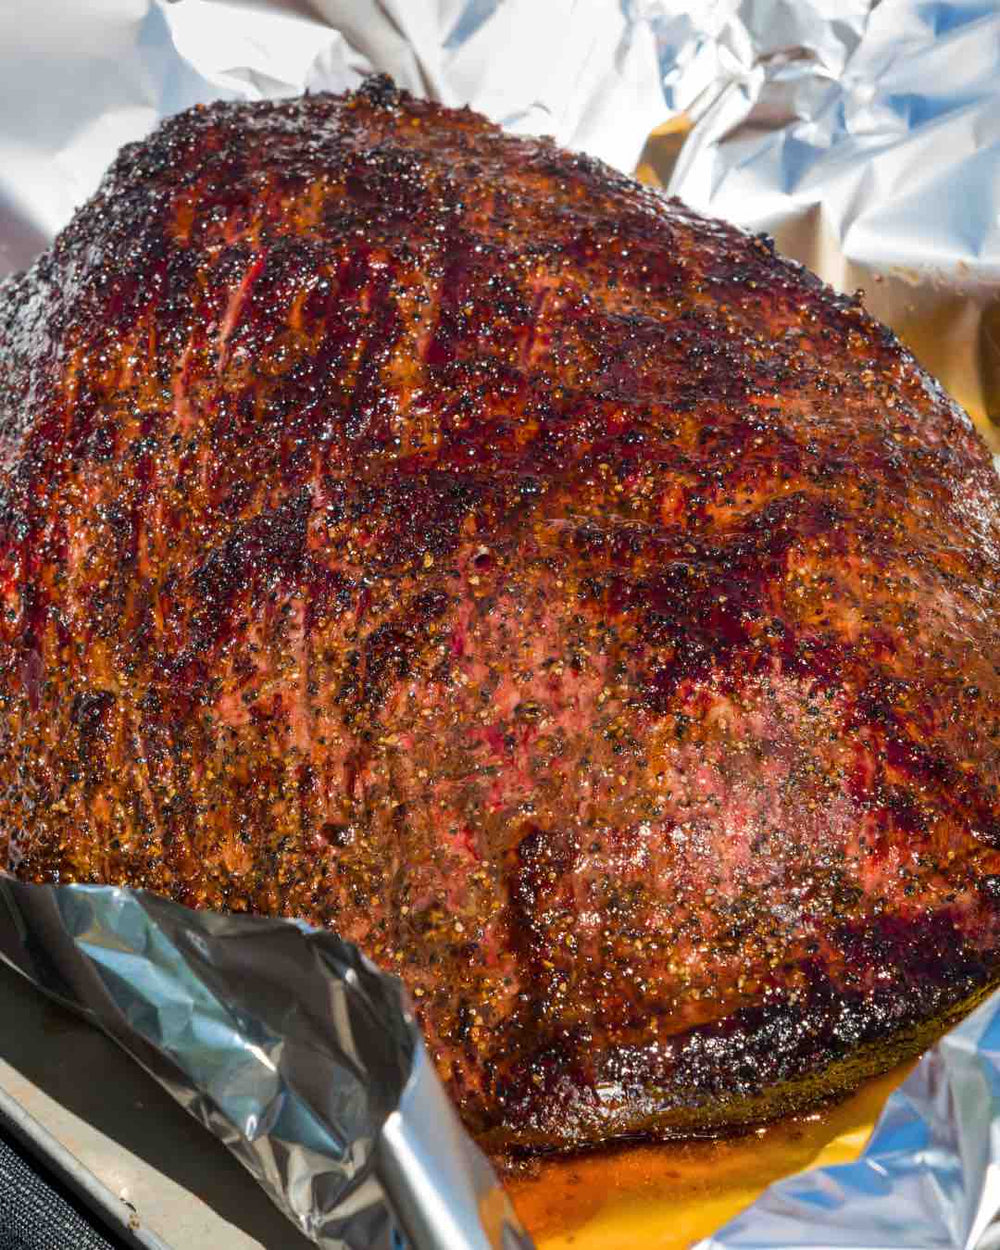 What Temp to Wrap Brisket: Wrapping Wisdom - Choosing the Right Temperature to Wrap Brisket